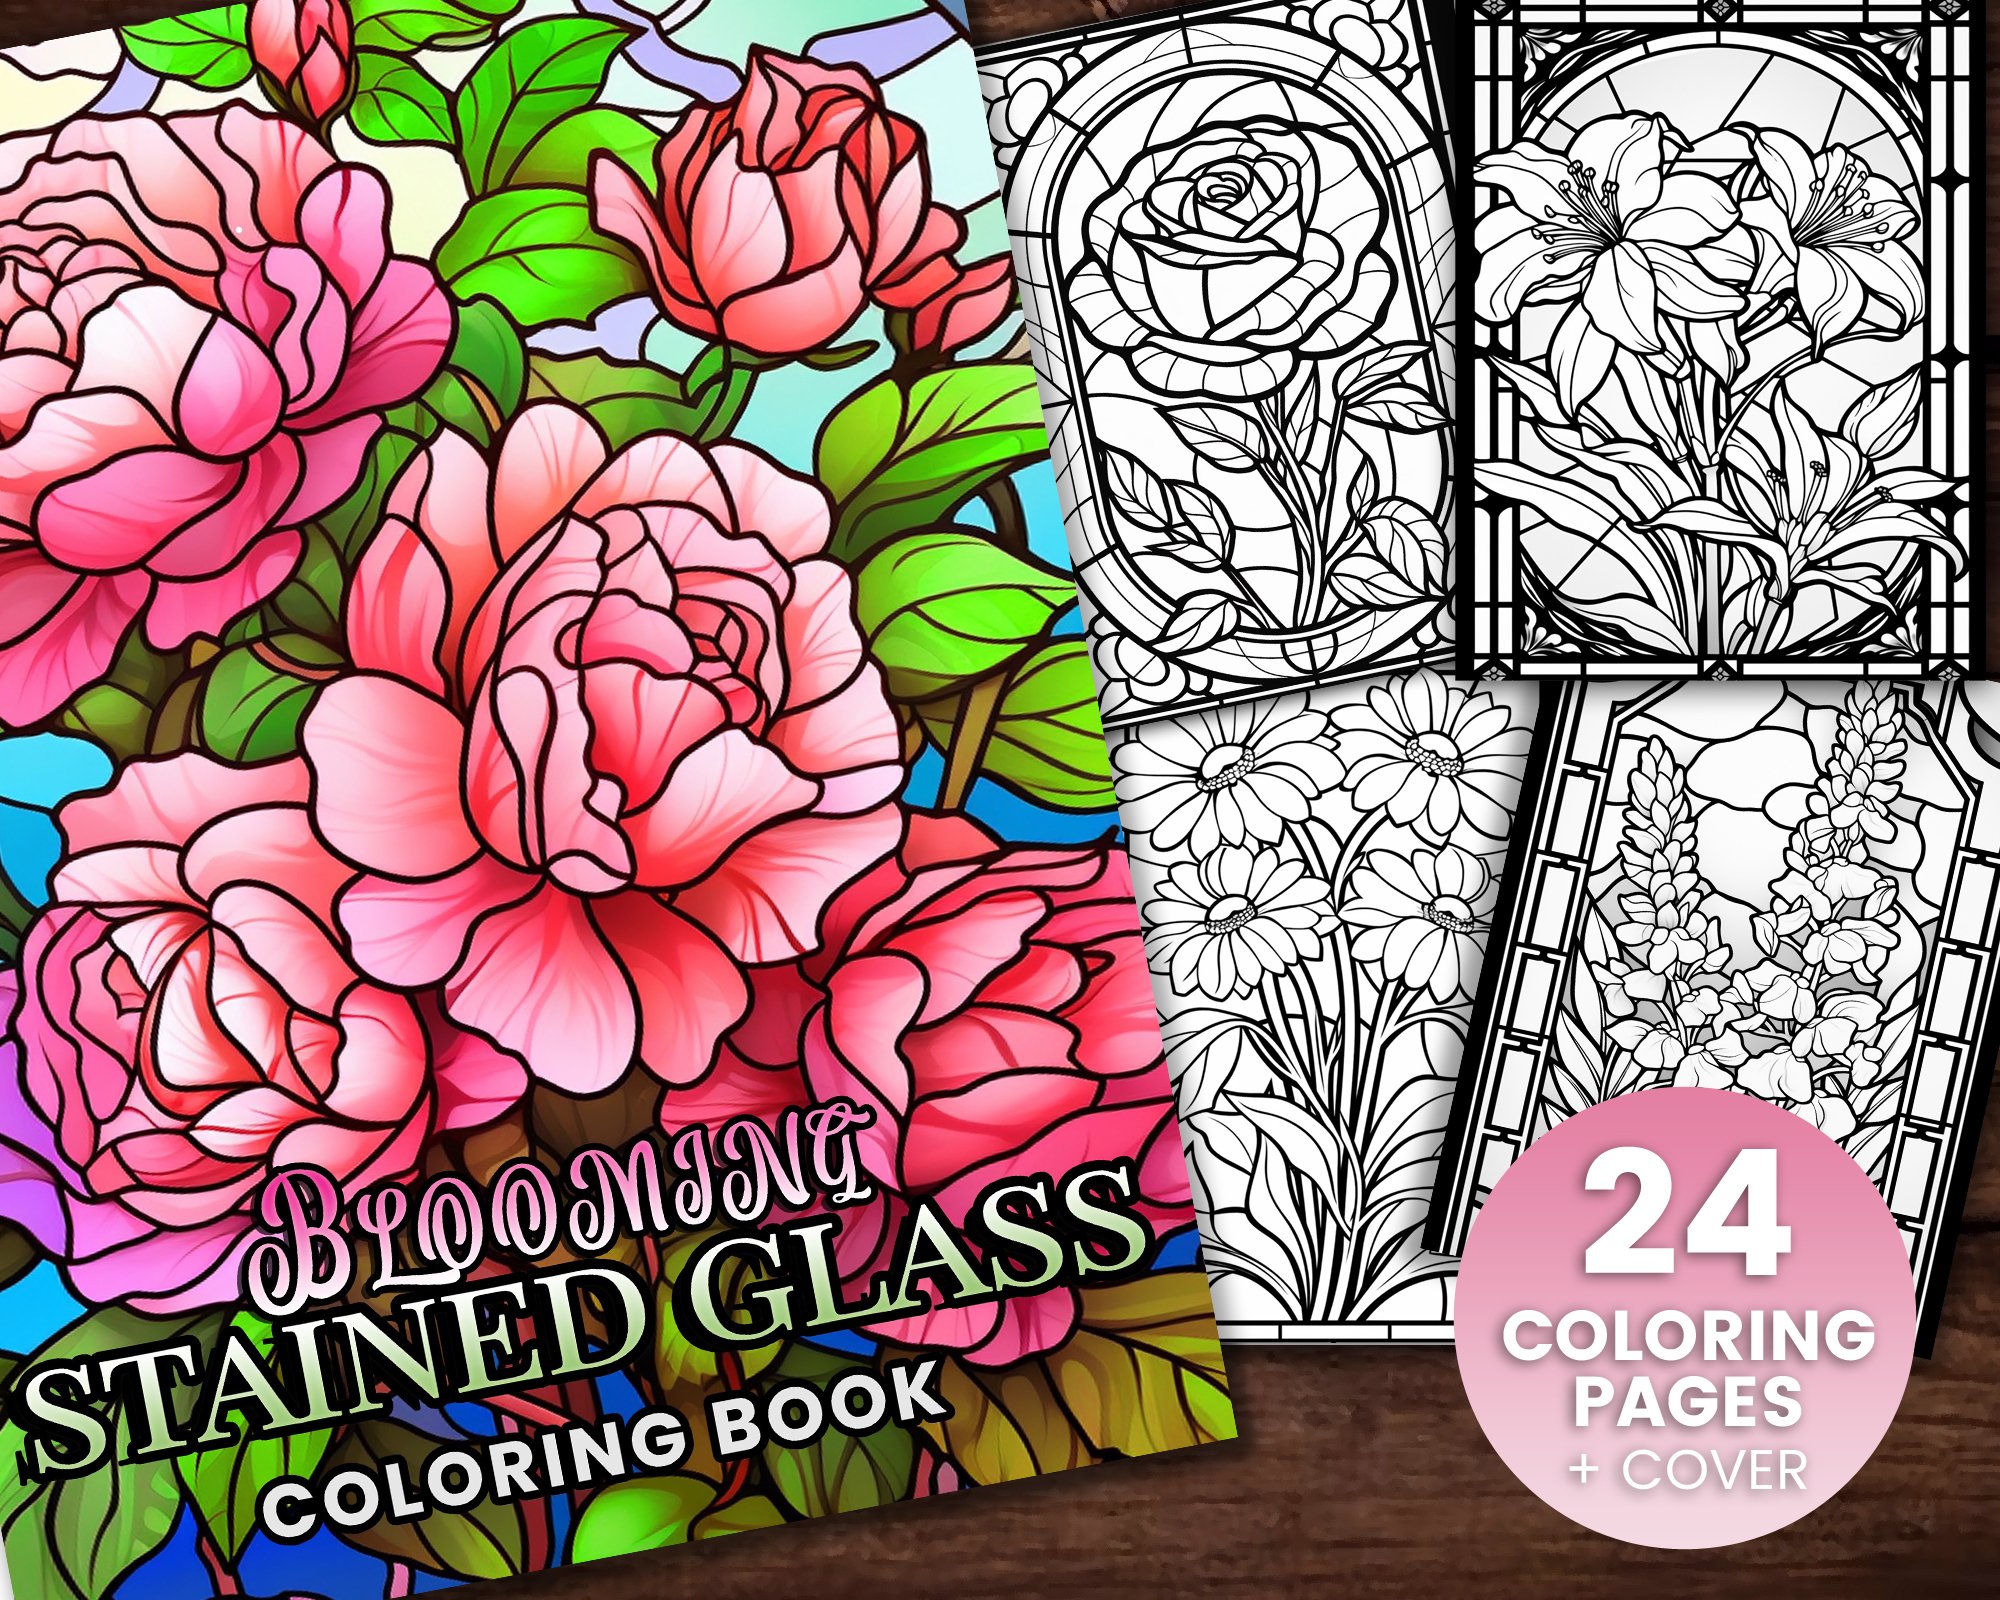 Blooming stained glass collection coloring book adults kids